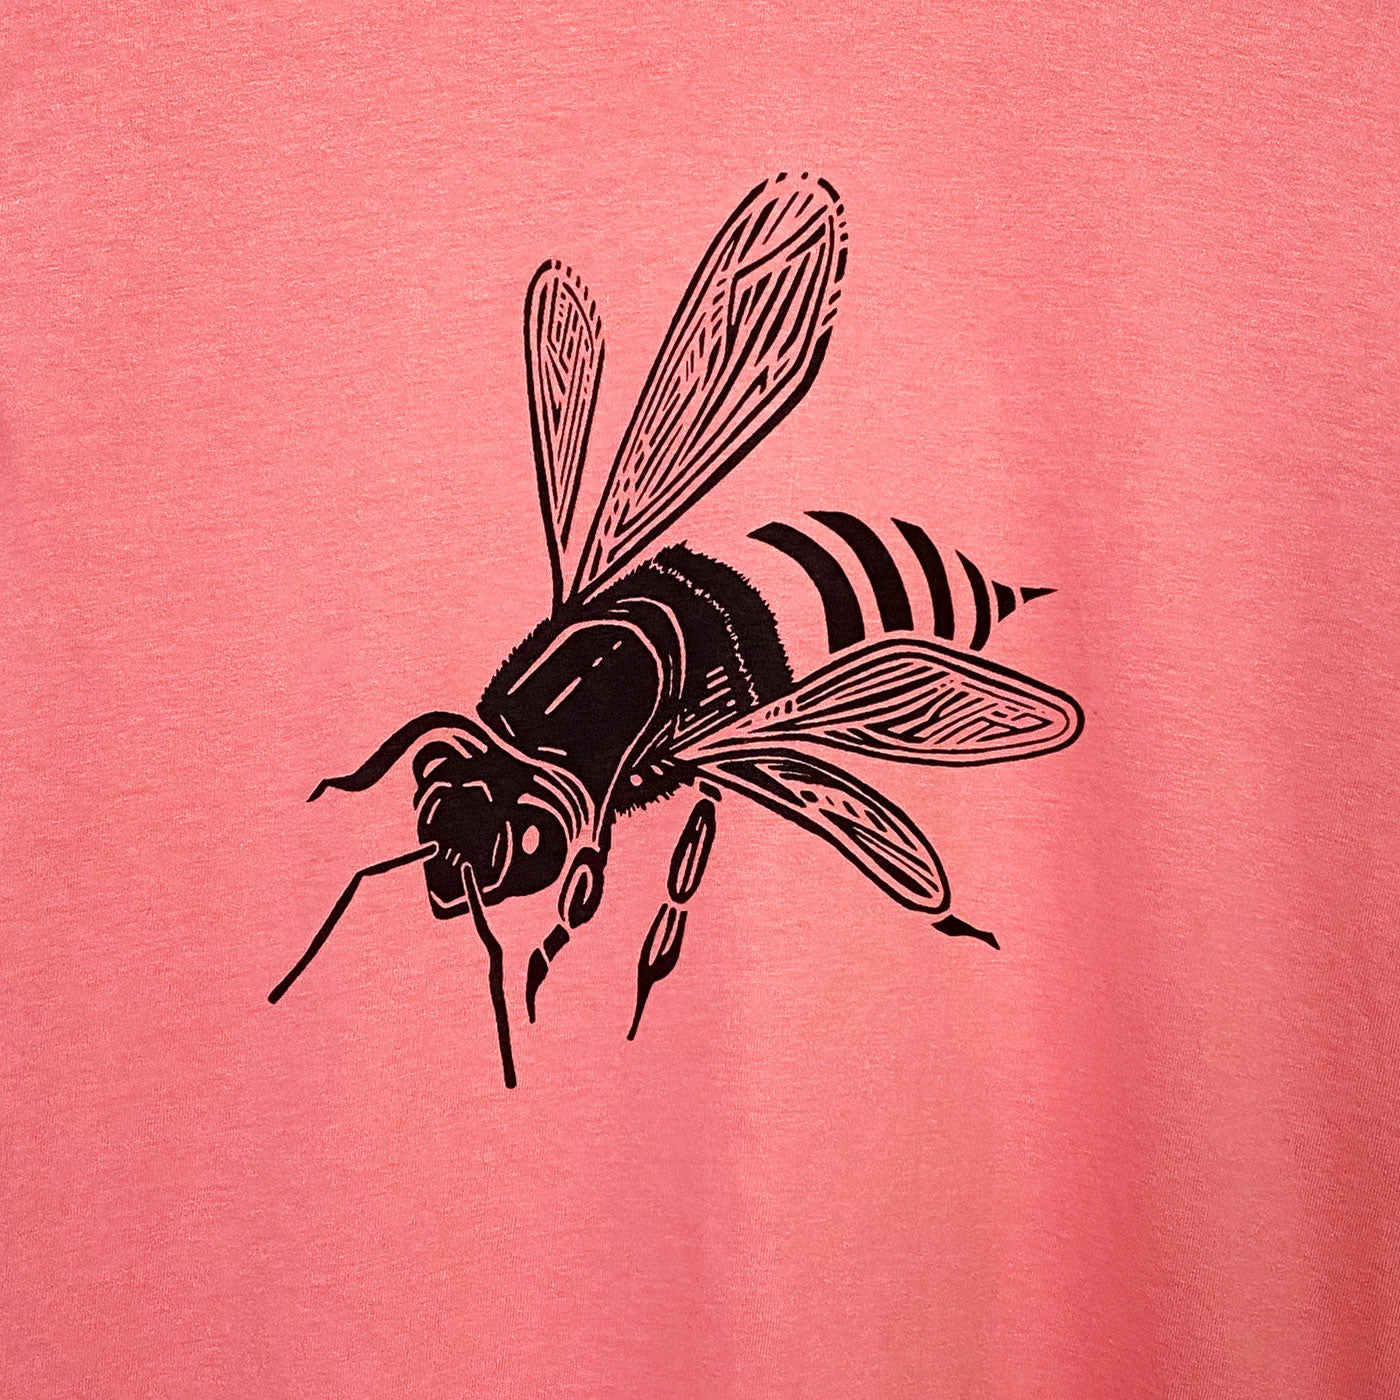 Bee t-shirt design with the bee seen from a 3/4 view on a coral cotton shirt